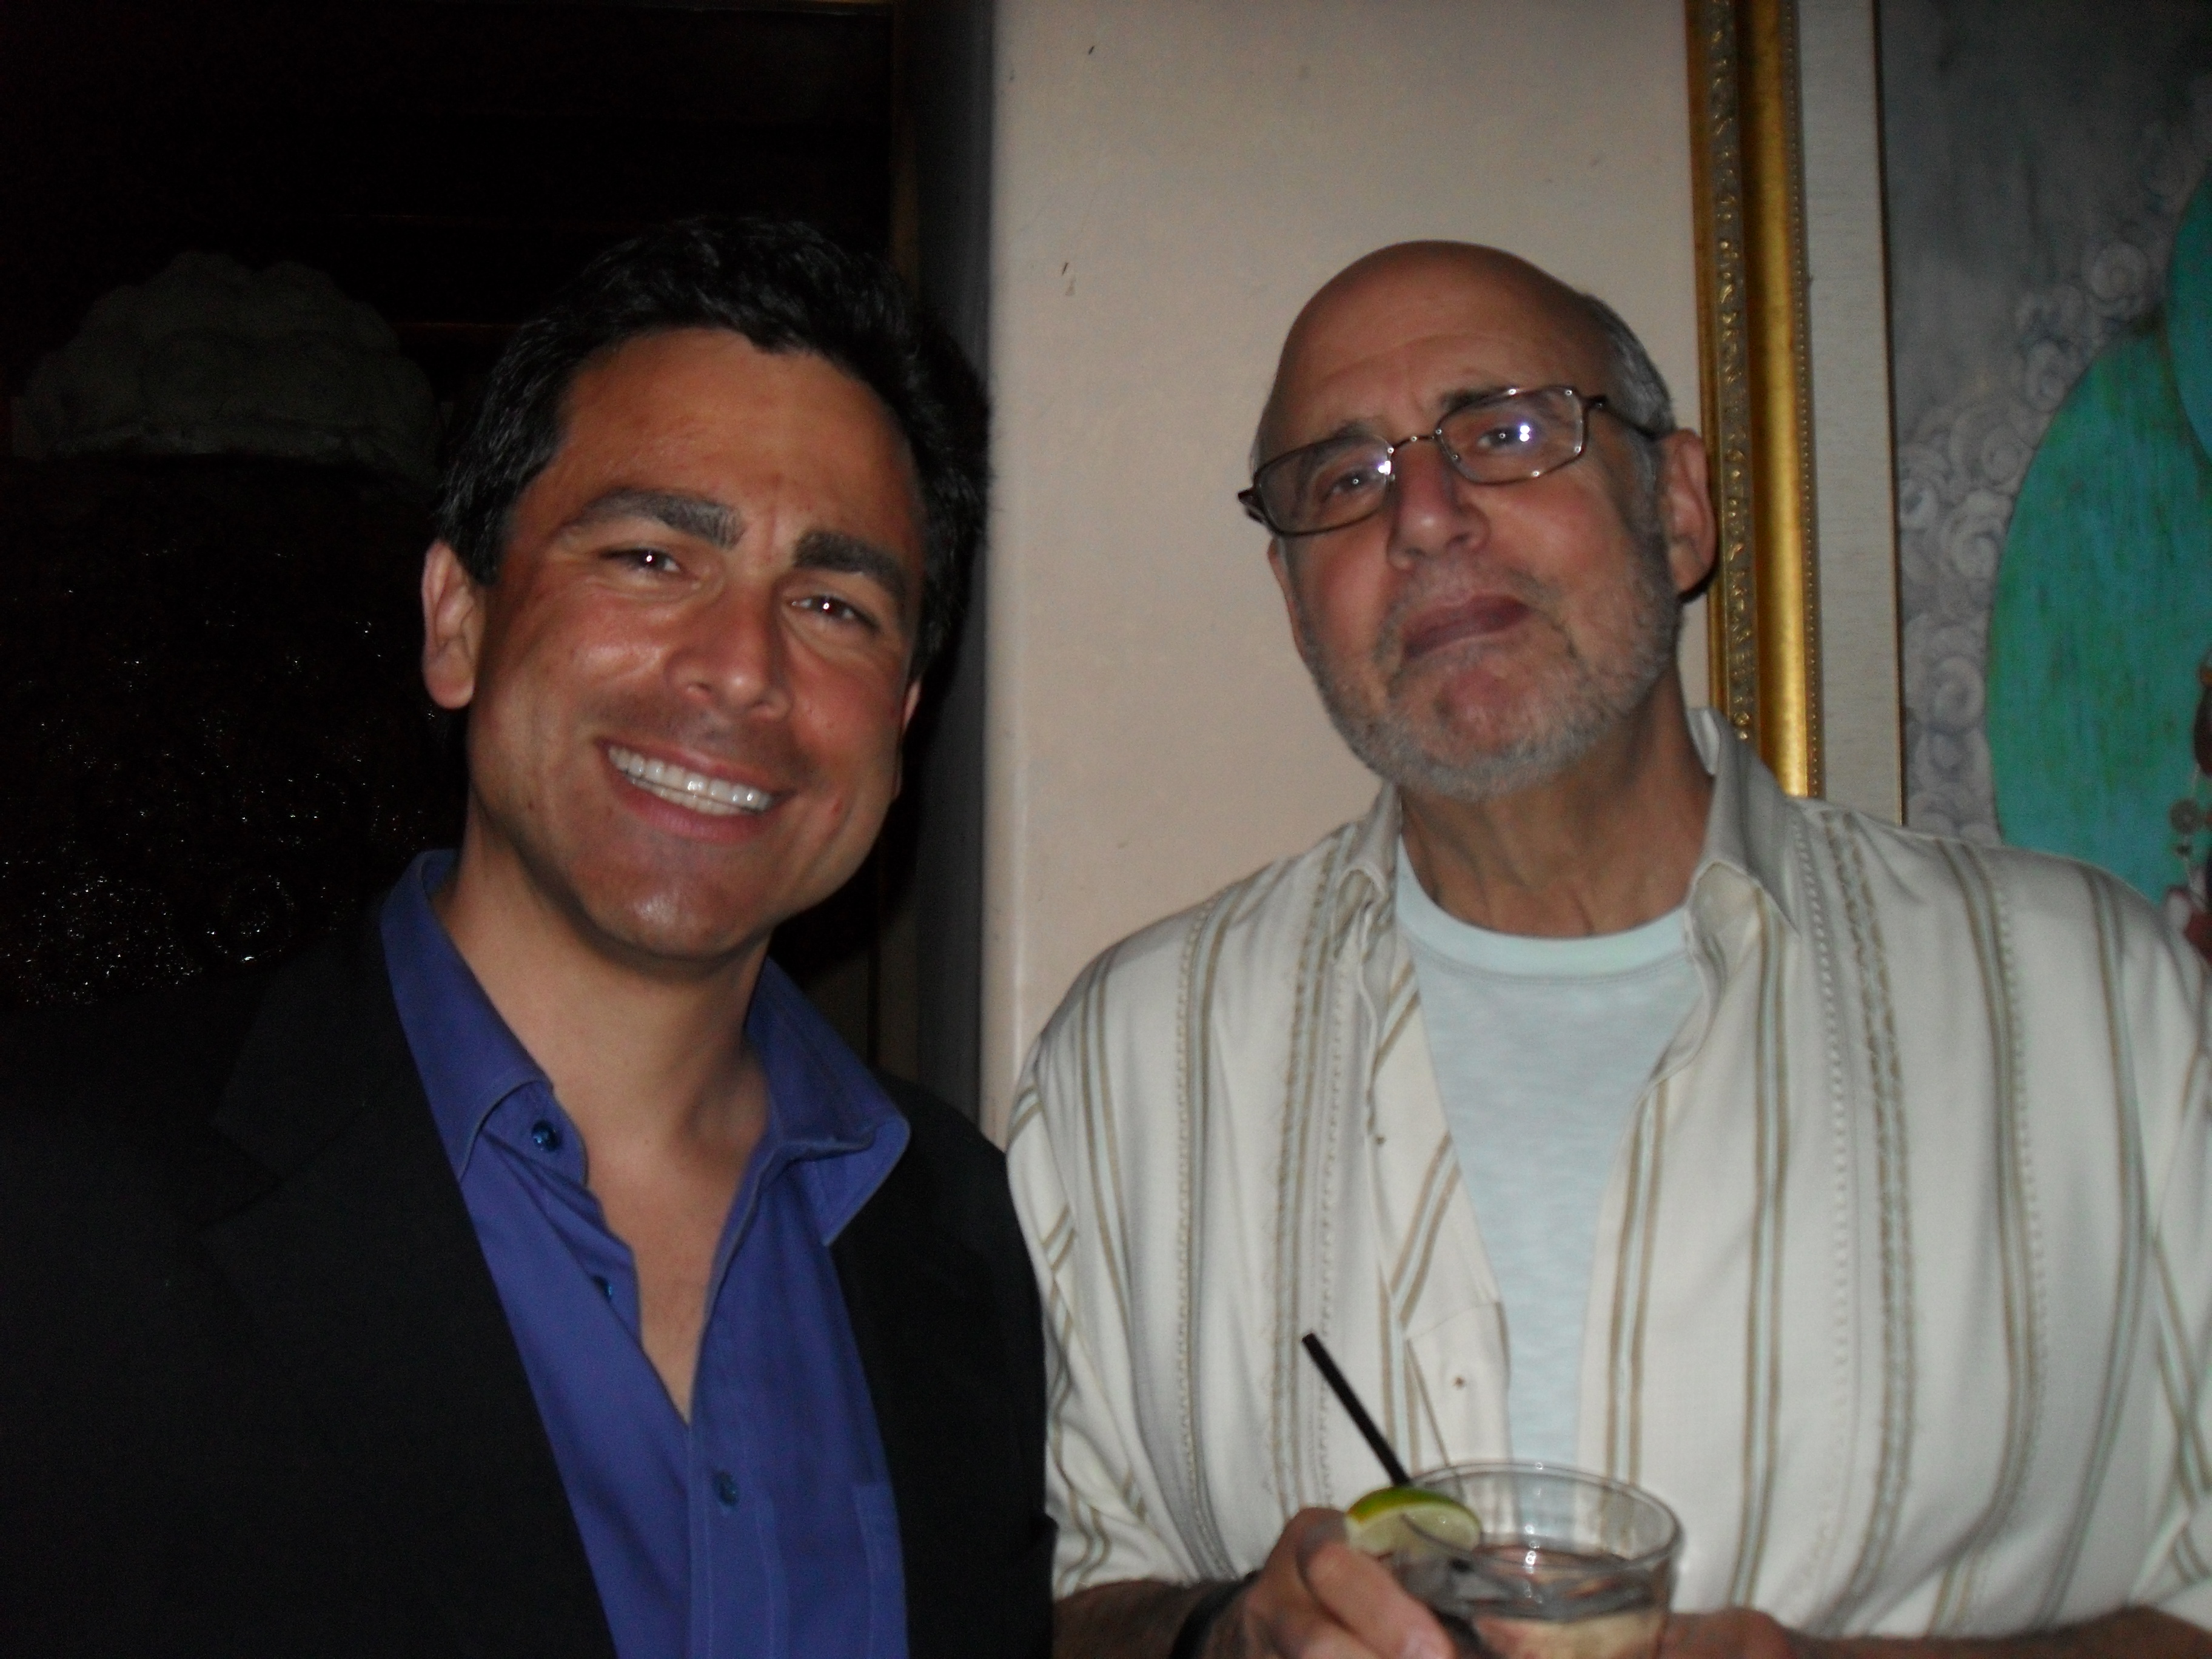 Jeffrey Tambor and John Prudhont at the Meeting Spencer Wrap Party.